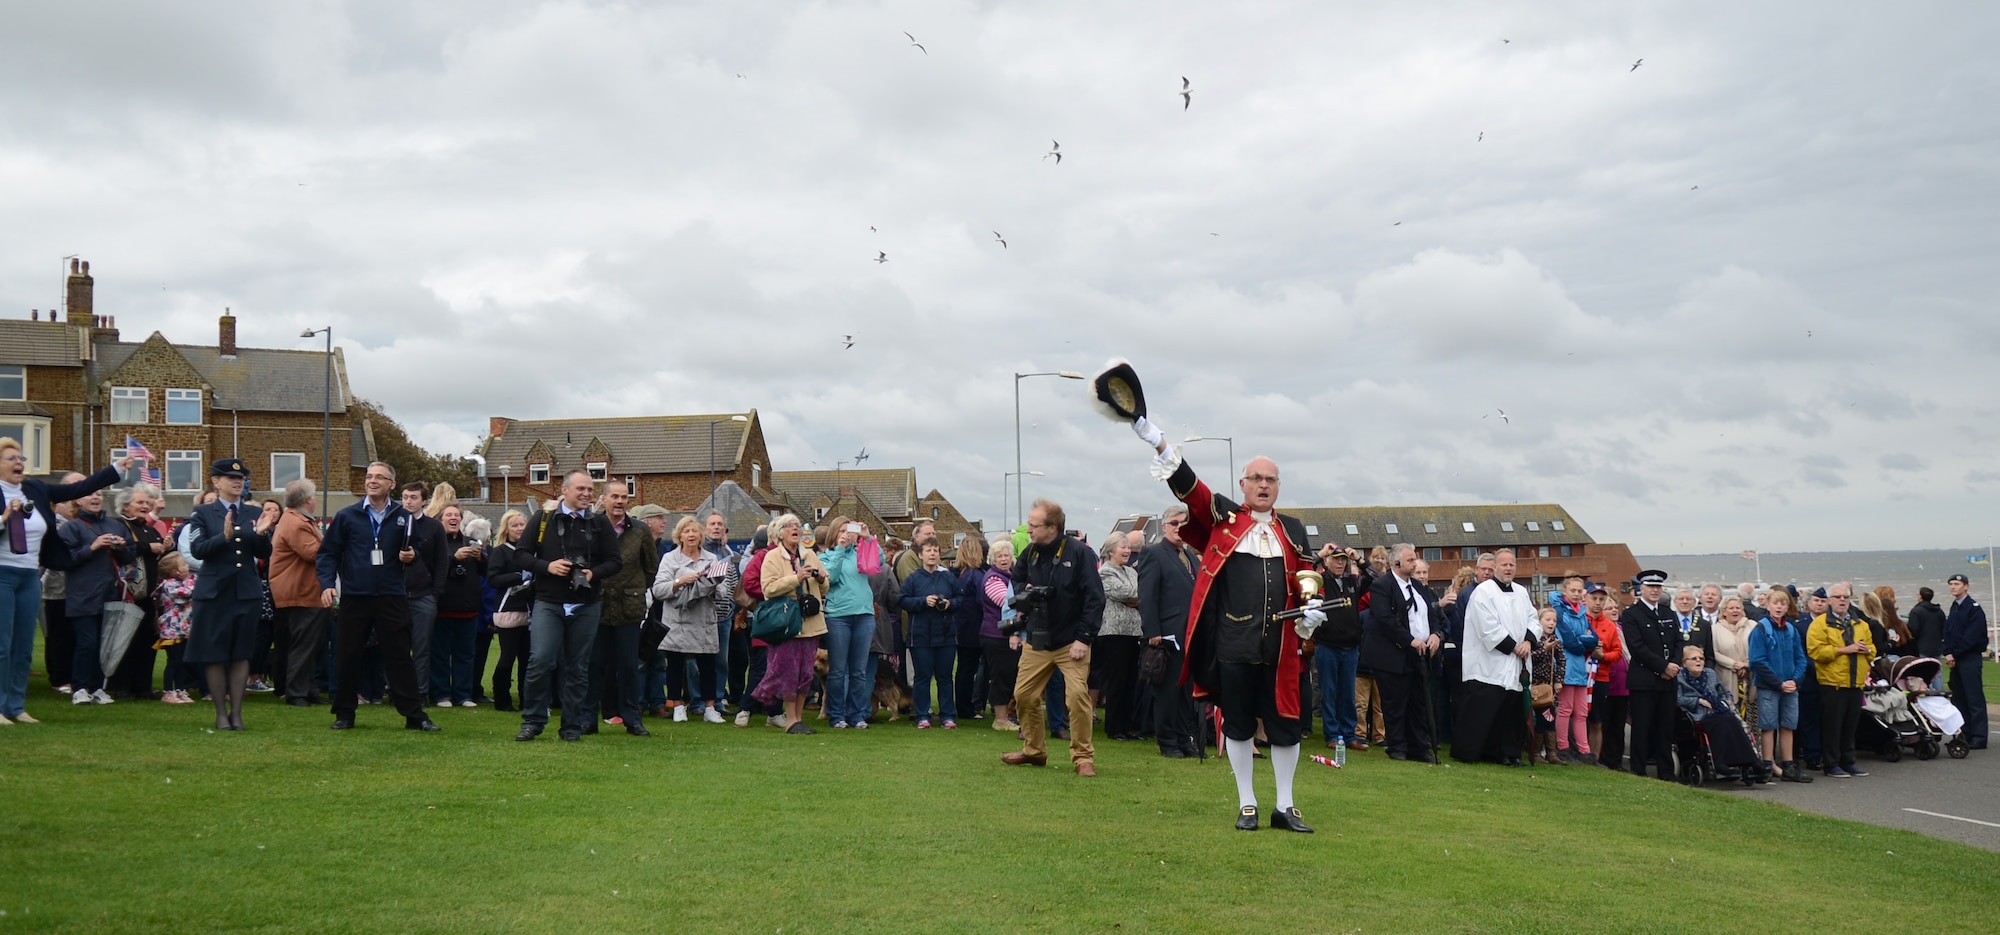 Hunstanton townspeople cheer after honoring the 67th Special Operation Squadron in a ceremony Oct. 4, 2014, at Hunstanton, England. The parade serves to mark both the depth of Hunstanton’s gratitude and the strength of the relationship that has developed between the seaside town and the 67th SOS over the years. (U.S. Air Force photo/Airman 1st Class Kyla Gifford/Released)